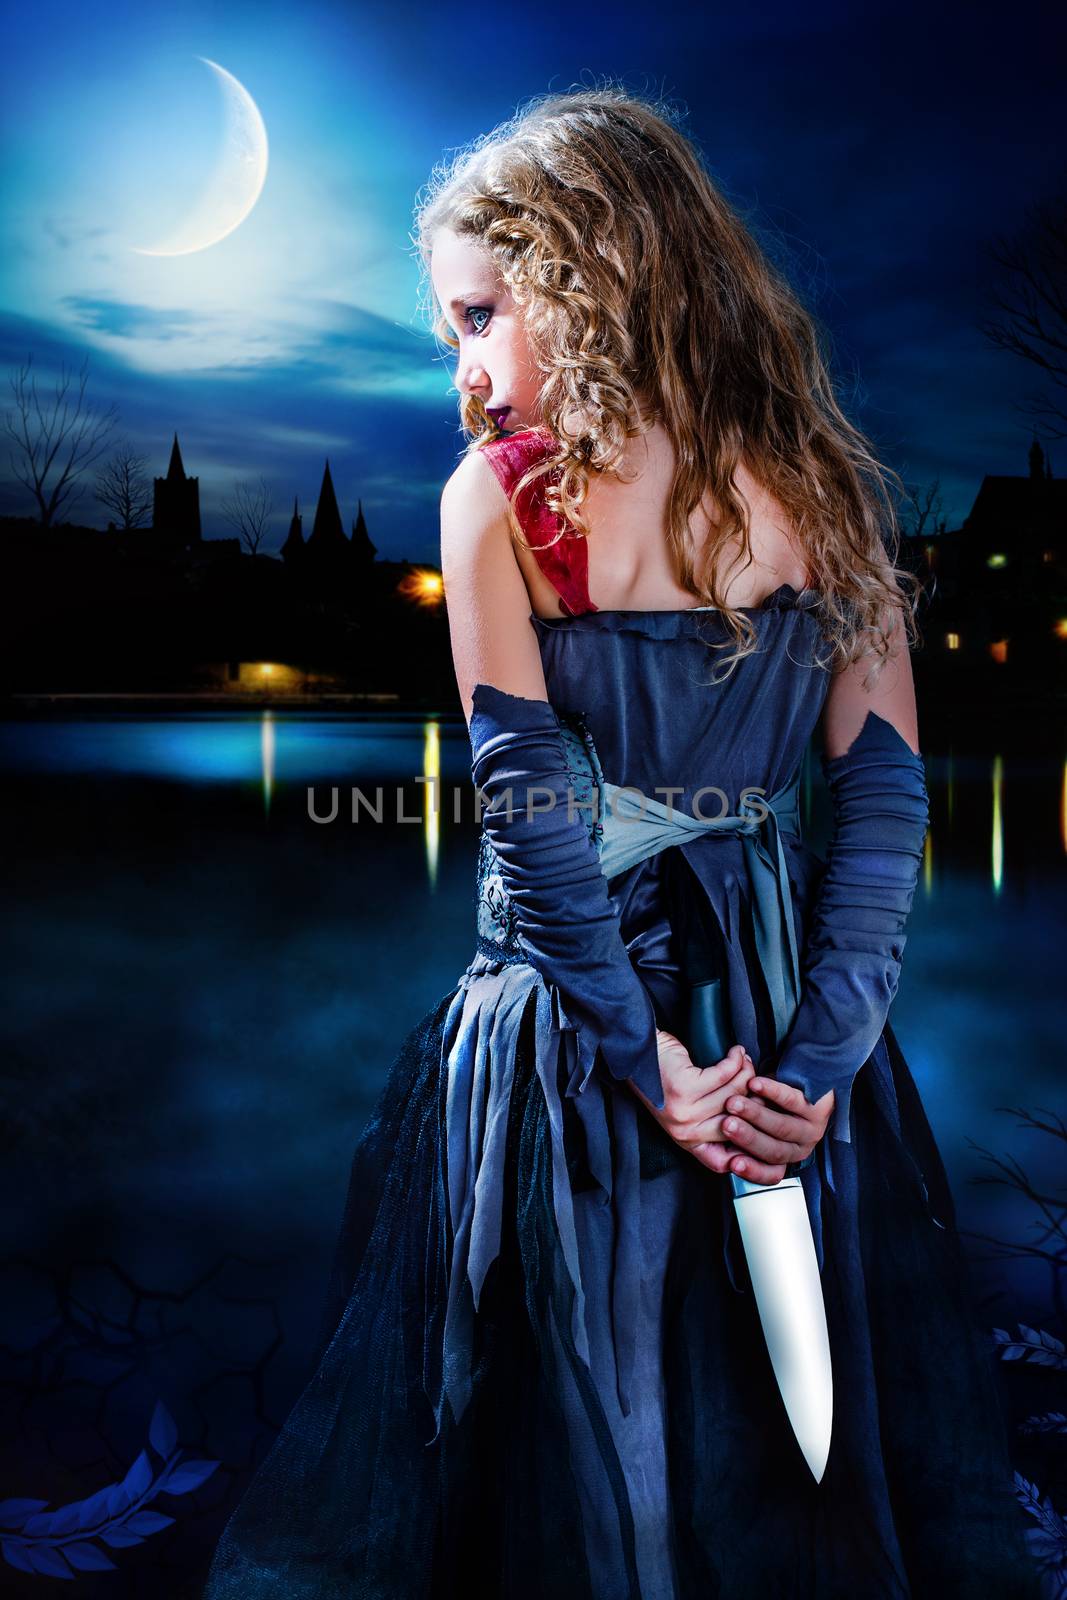 Close up portrait mysterious gothic girl holding knife behind back. Girl standing with big knife behind back at dusk. Medieval cityscape in background with reflection on dark water.